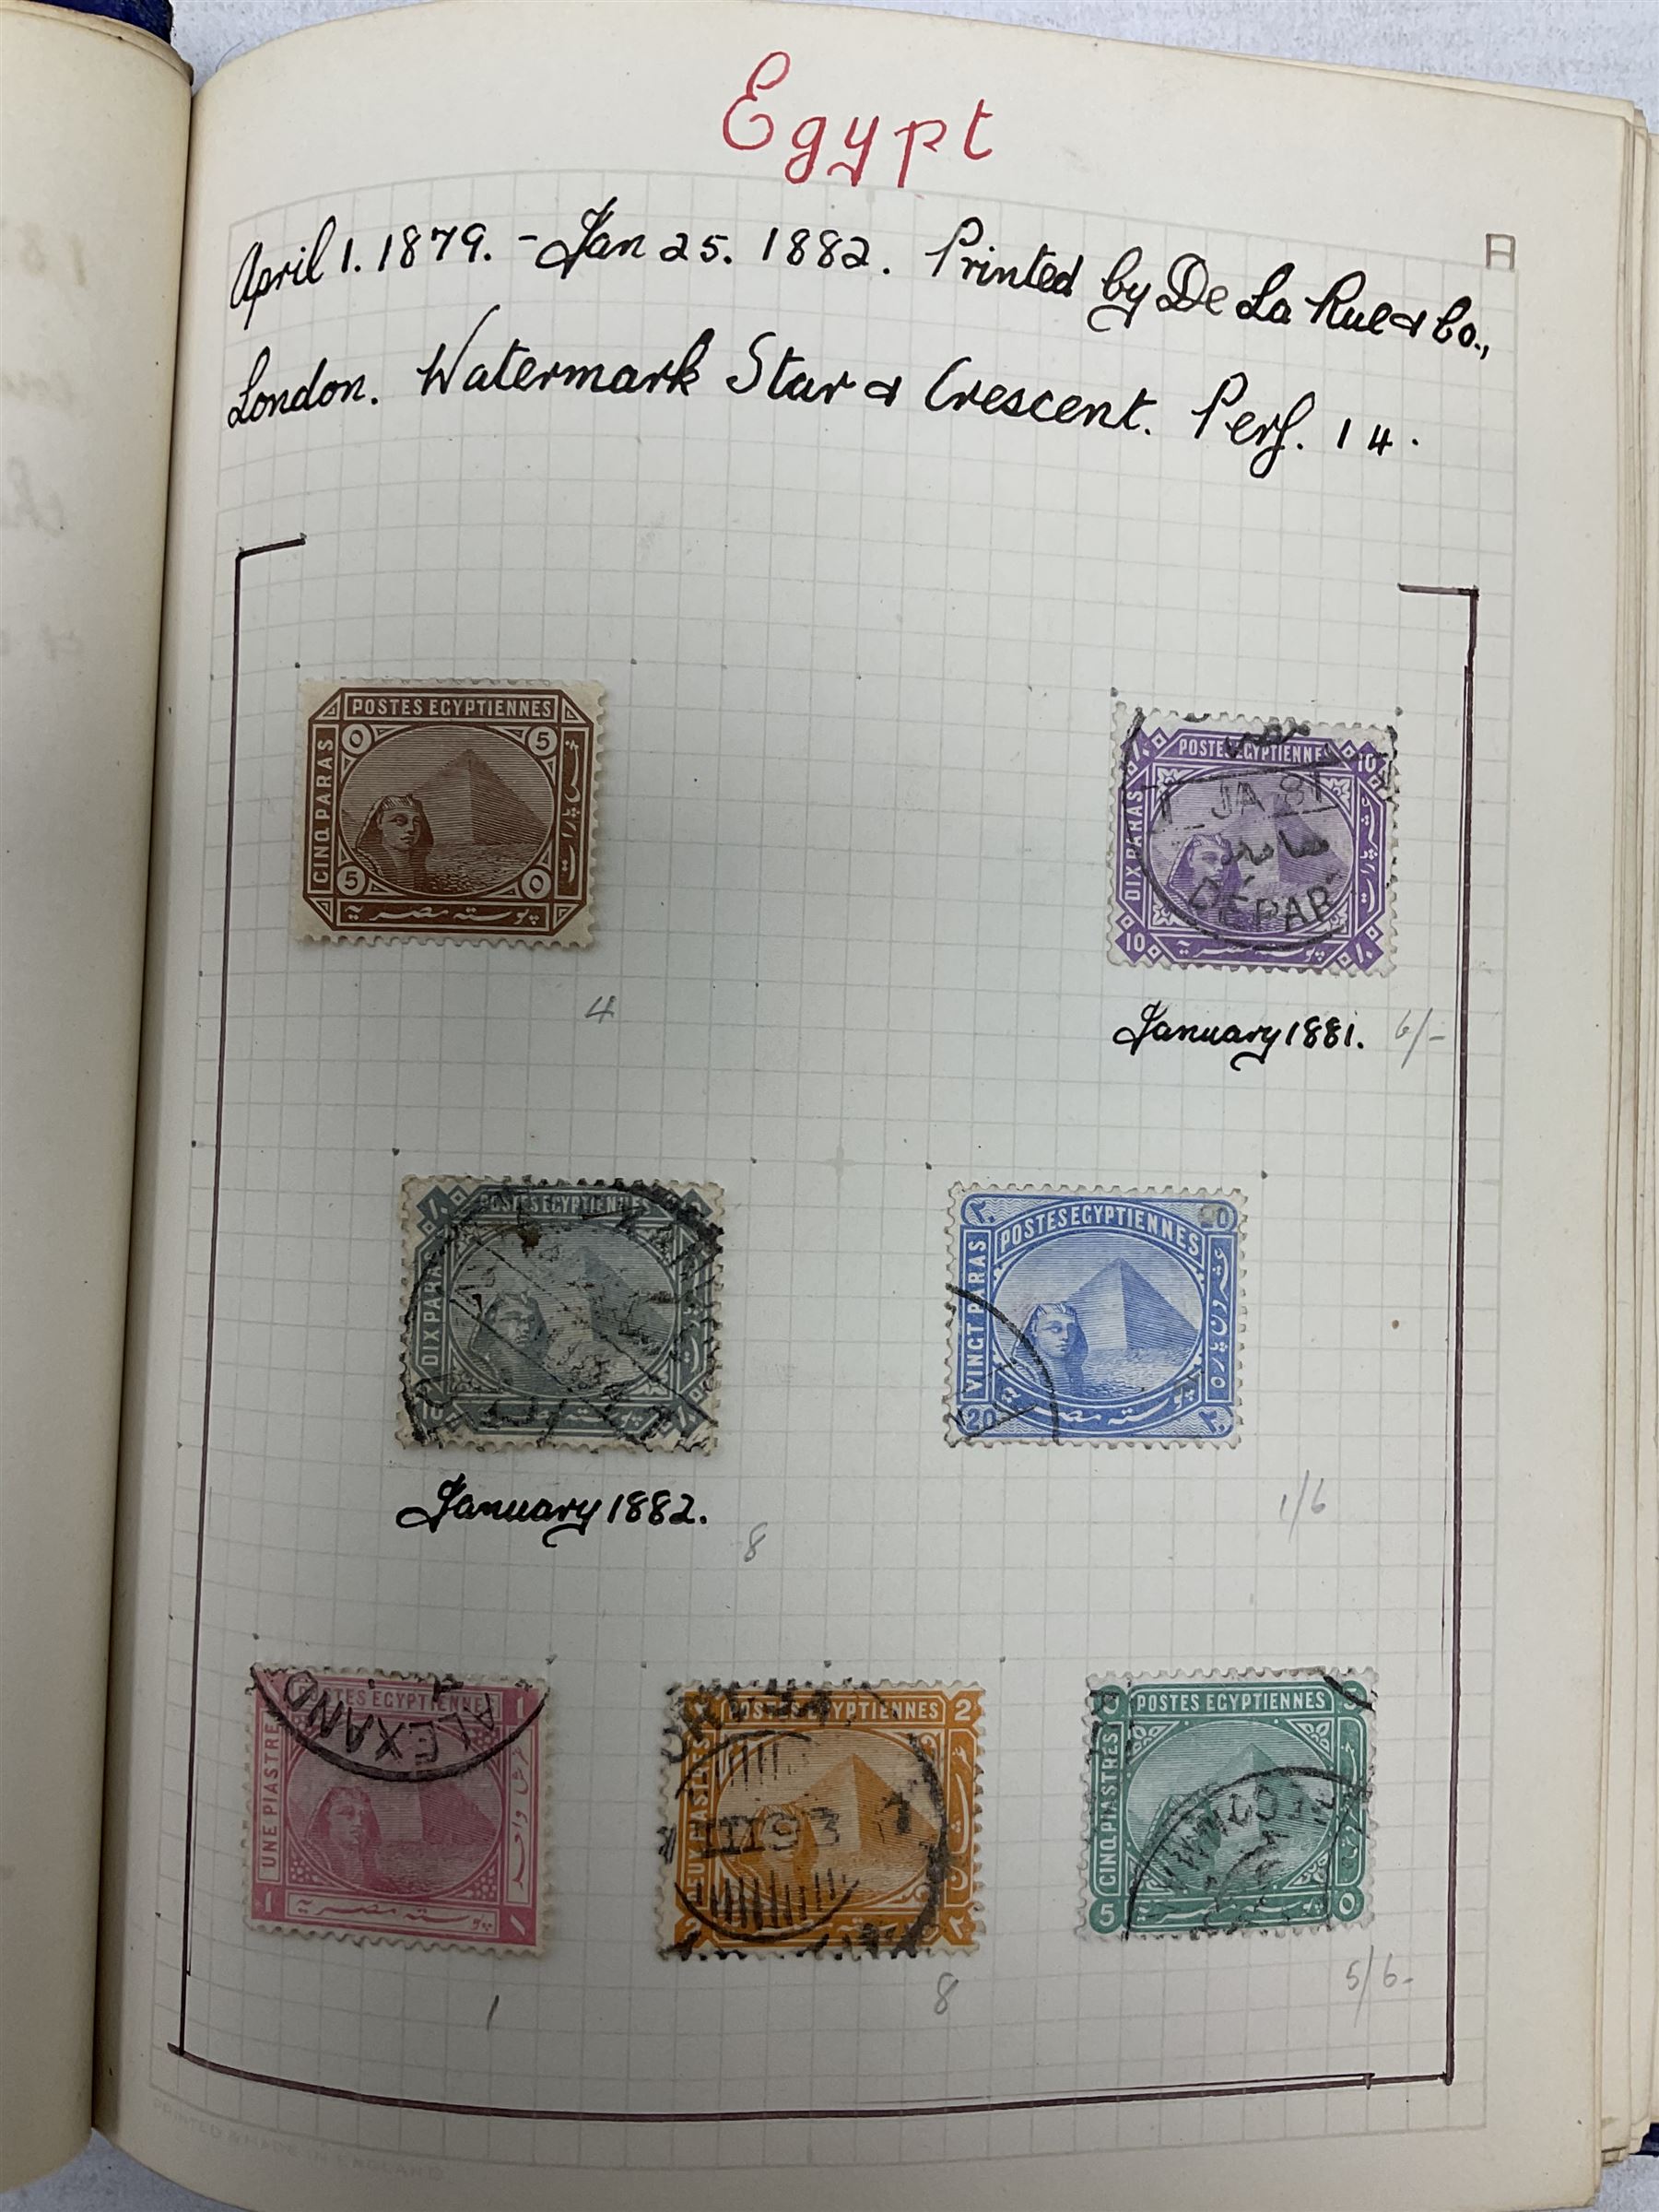 Egypt 1866 and later stamps - Image 58 of 761